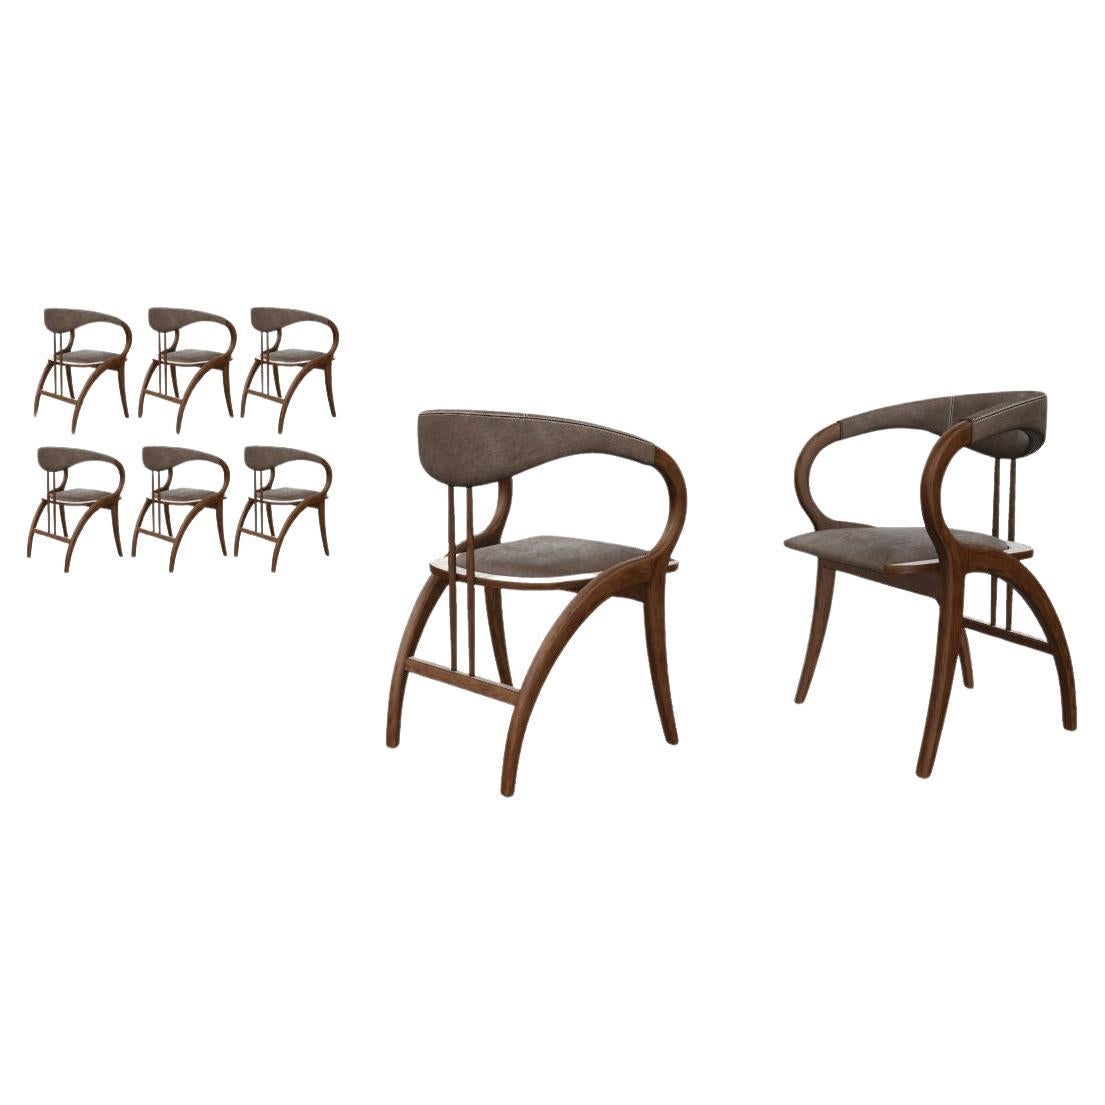 Mid-century Modern Style Set of 8 Dining Chairs Customizable For Sale